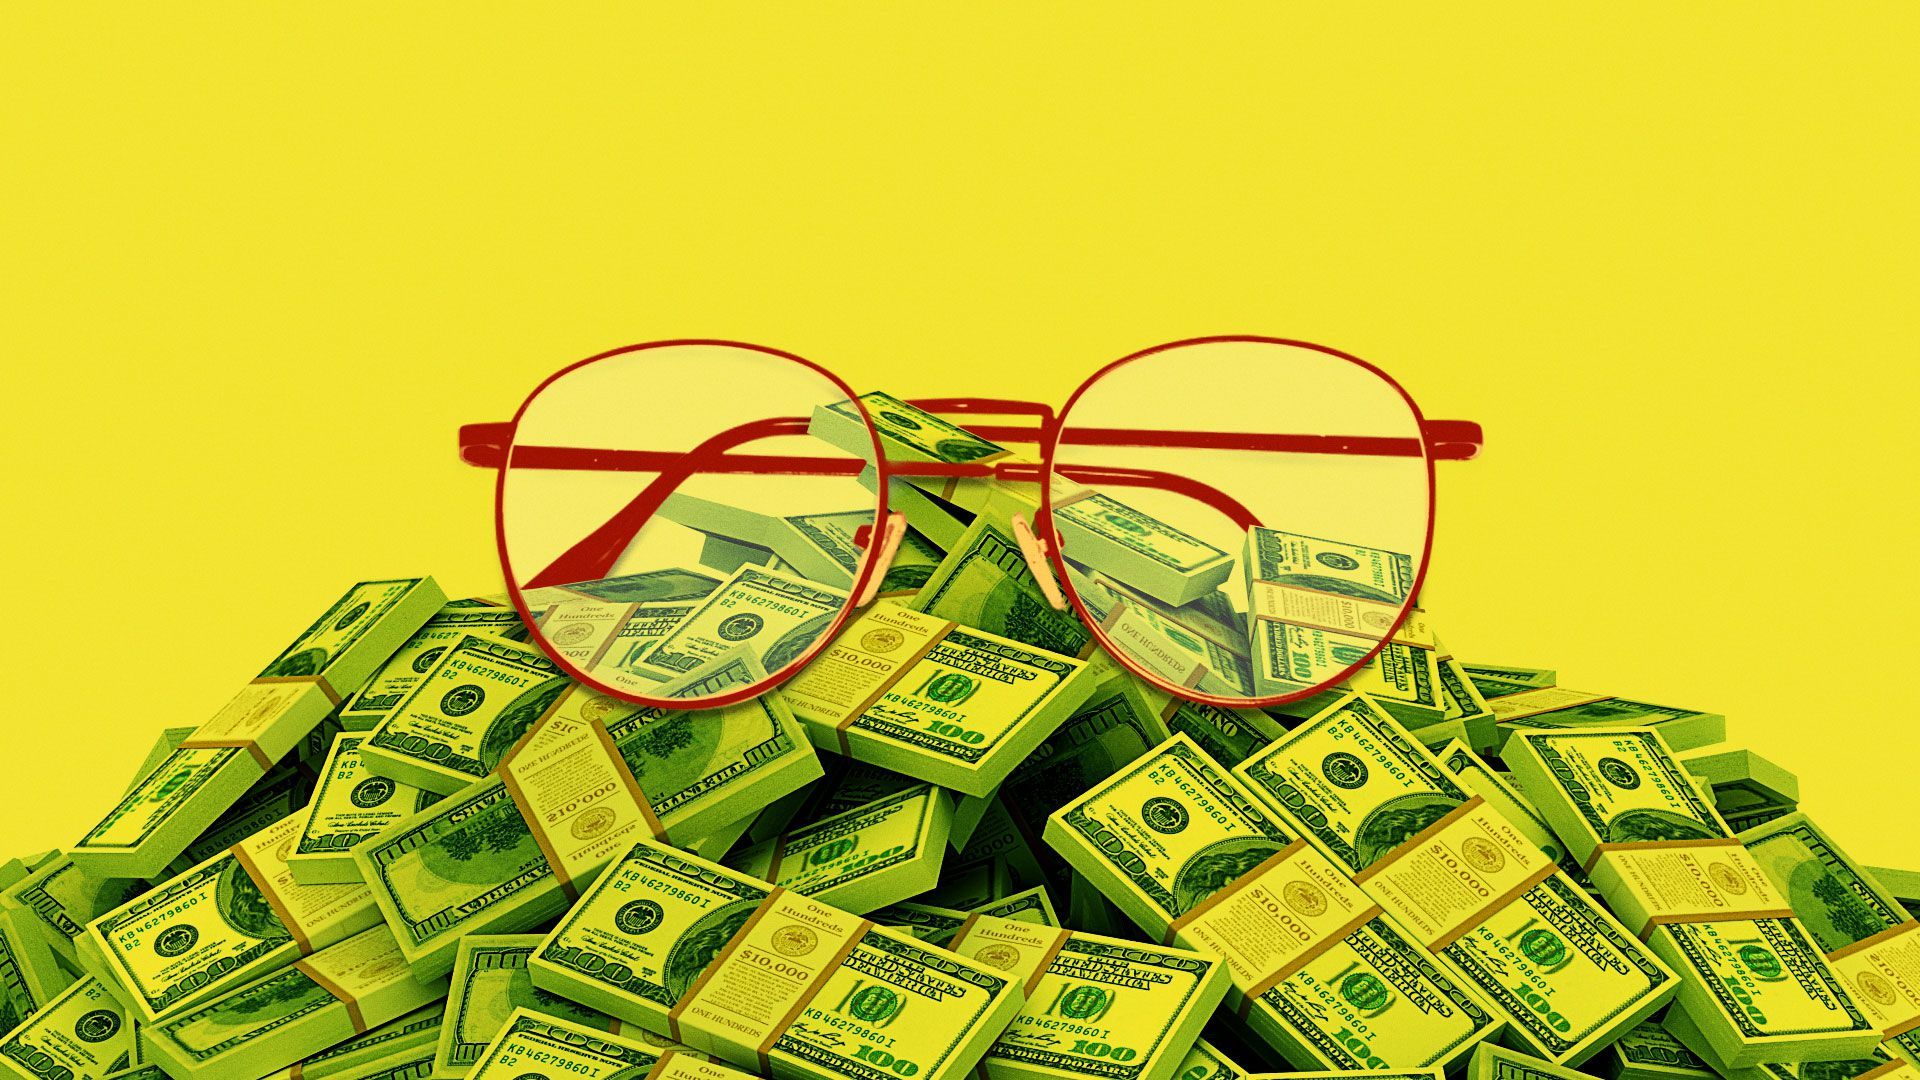 Illustration of glasses on a pile of money